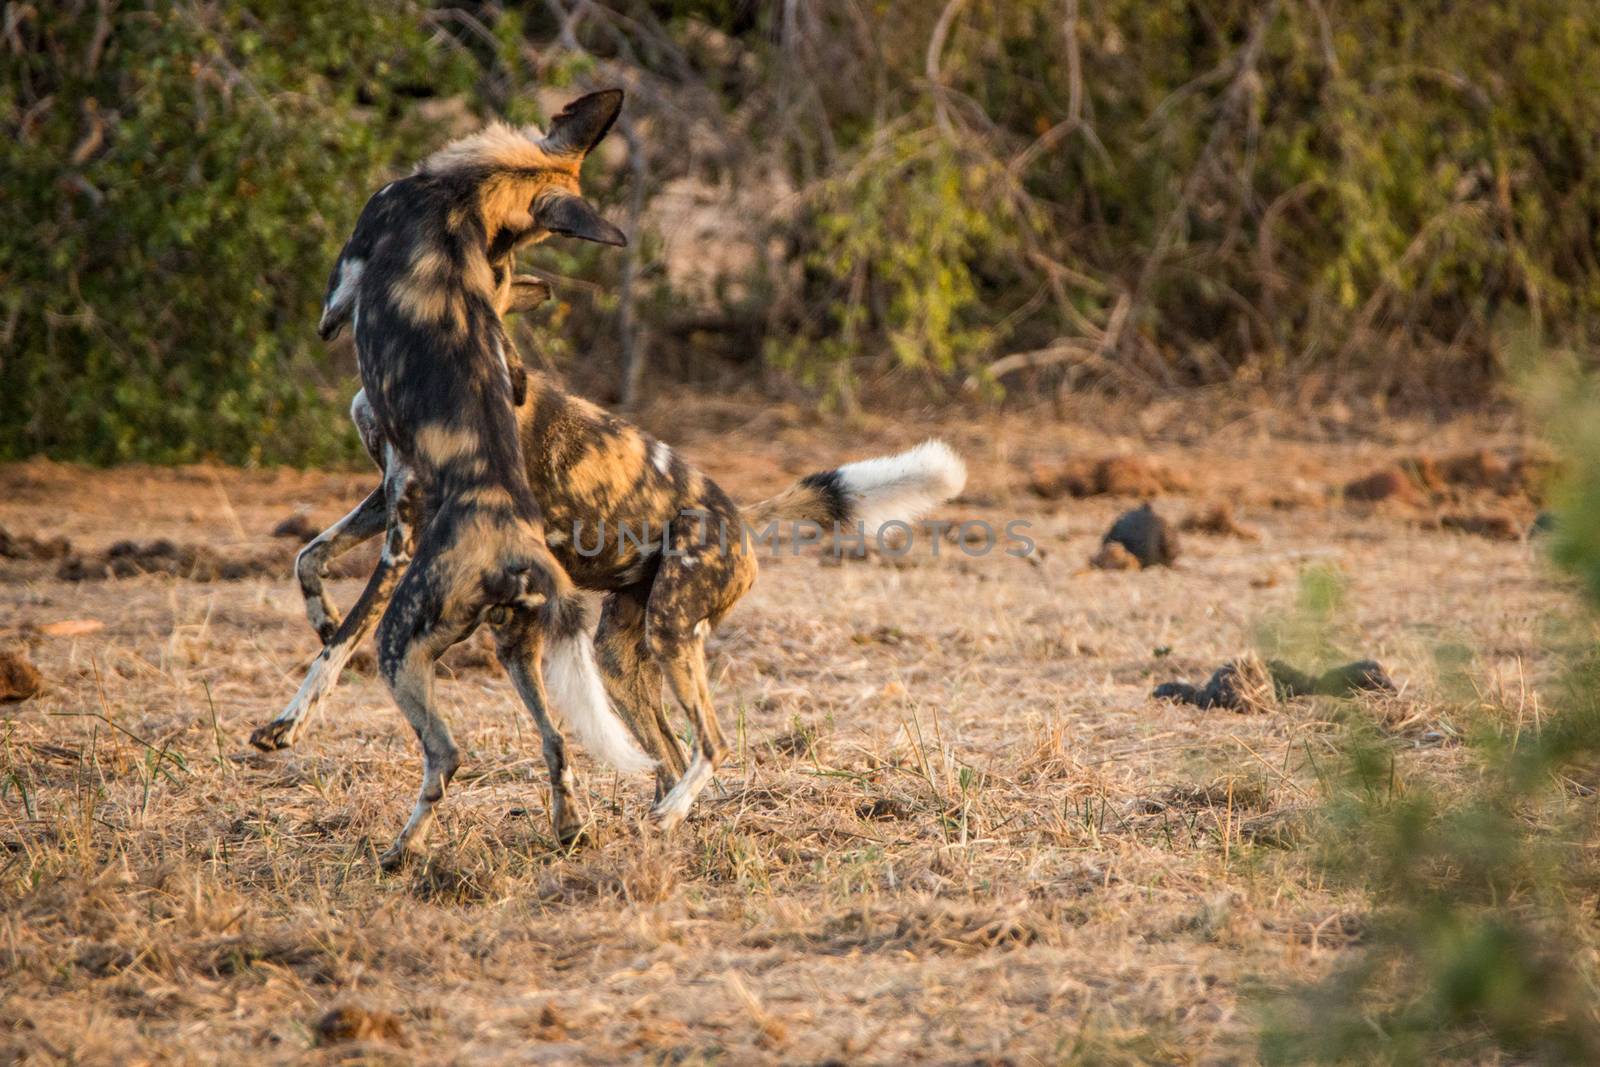 African wild dogs playing together in the Kruger National Park, South Africa.